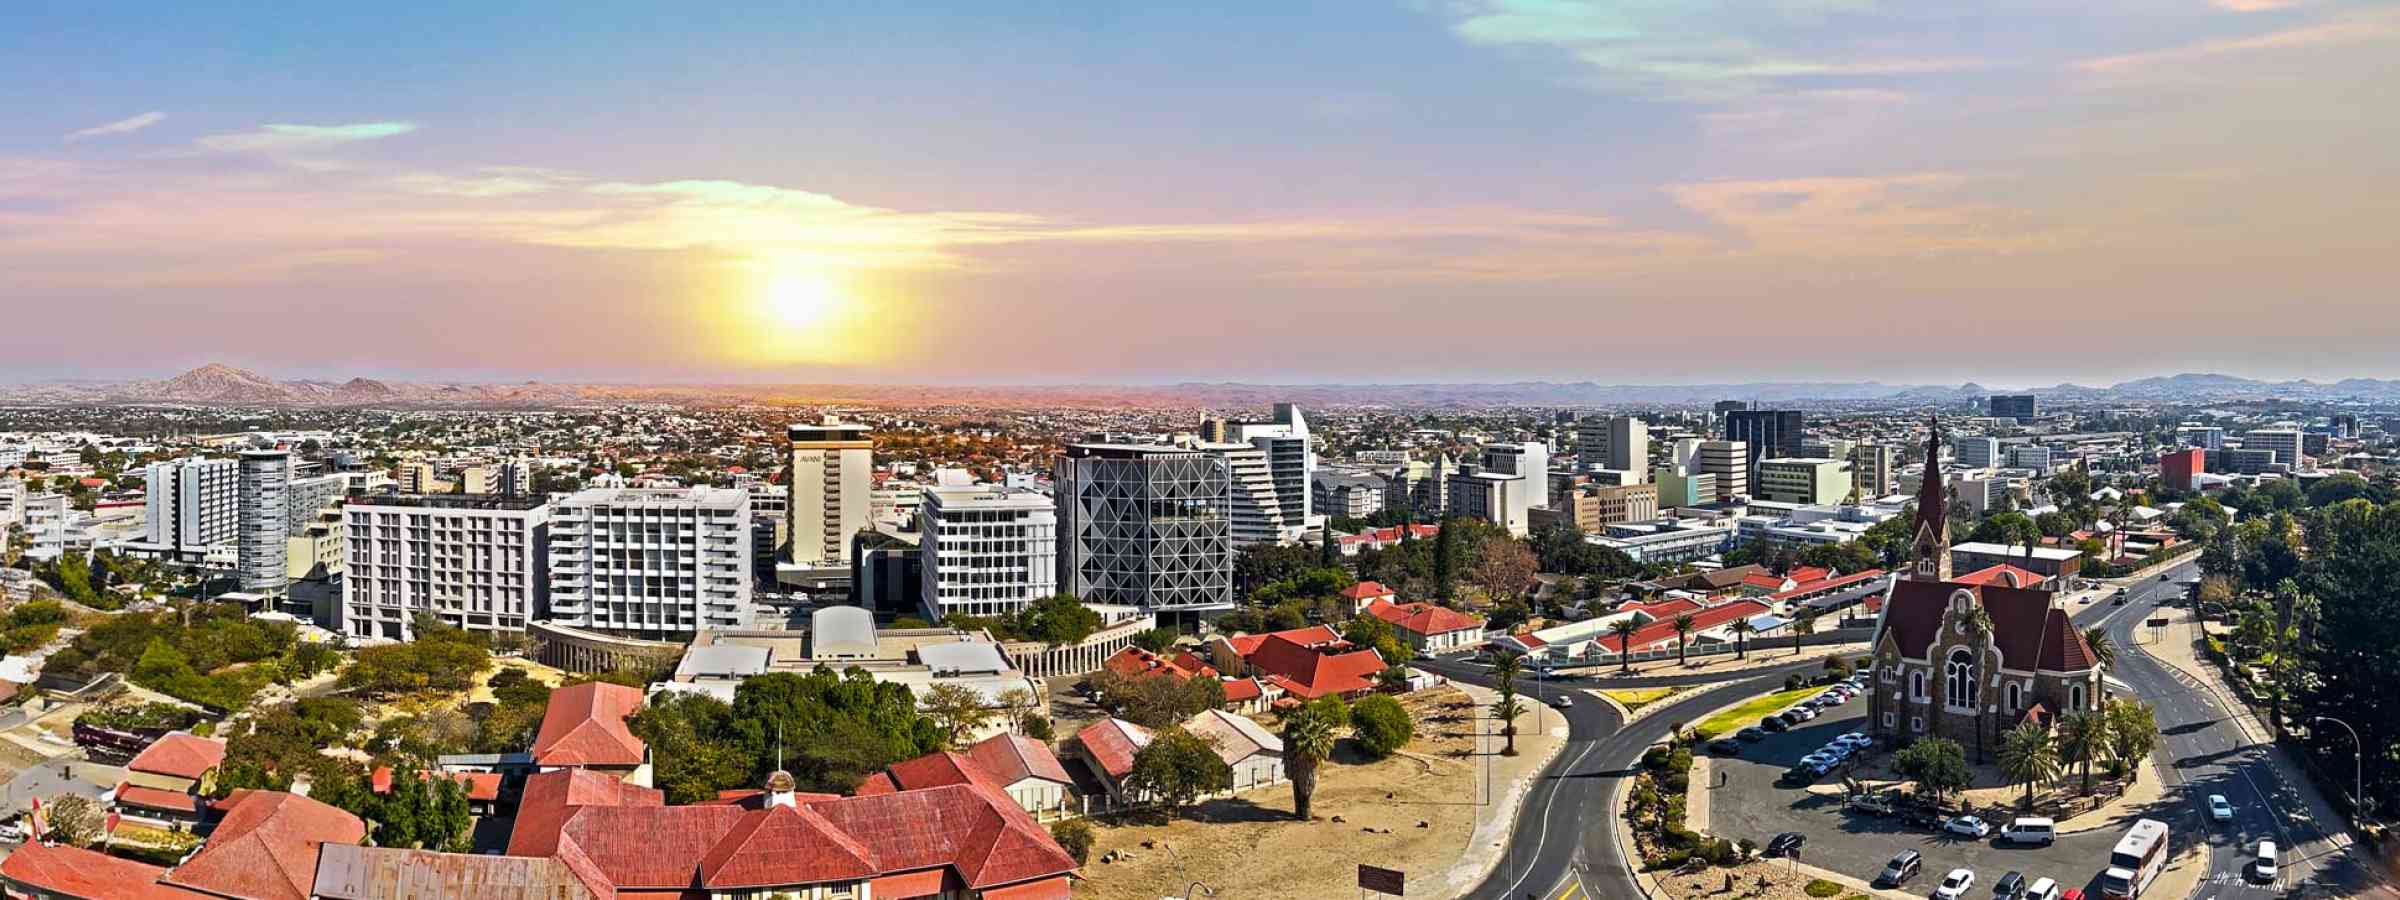 Namibia city scape